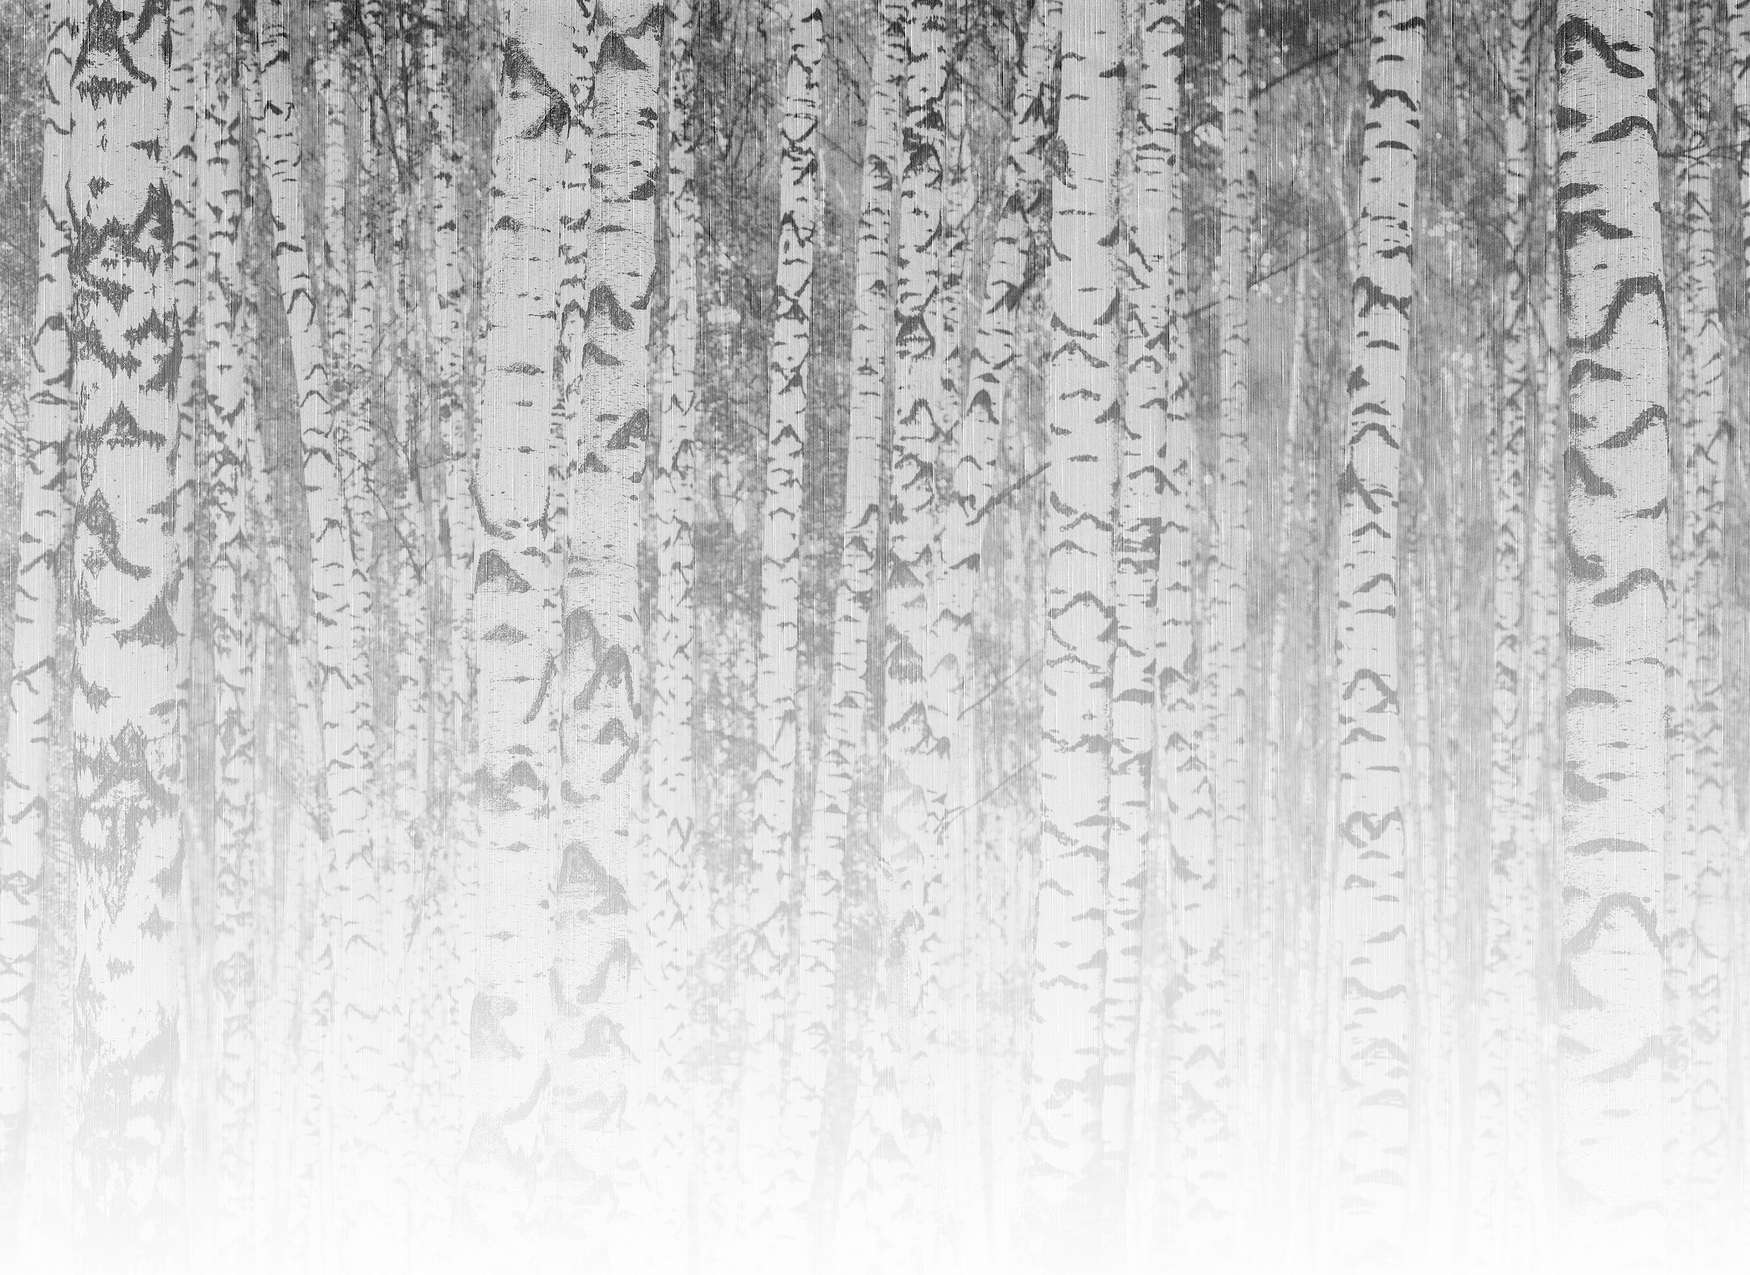             Photo wallpaper light birch tree trunks in misty forest - black and white
        